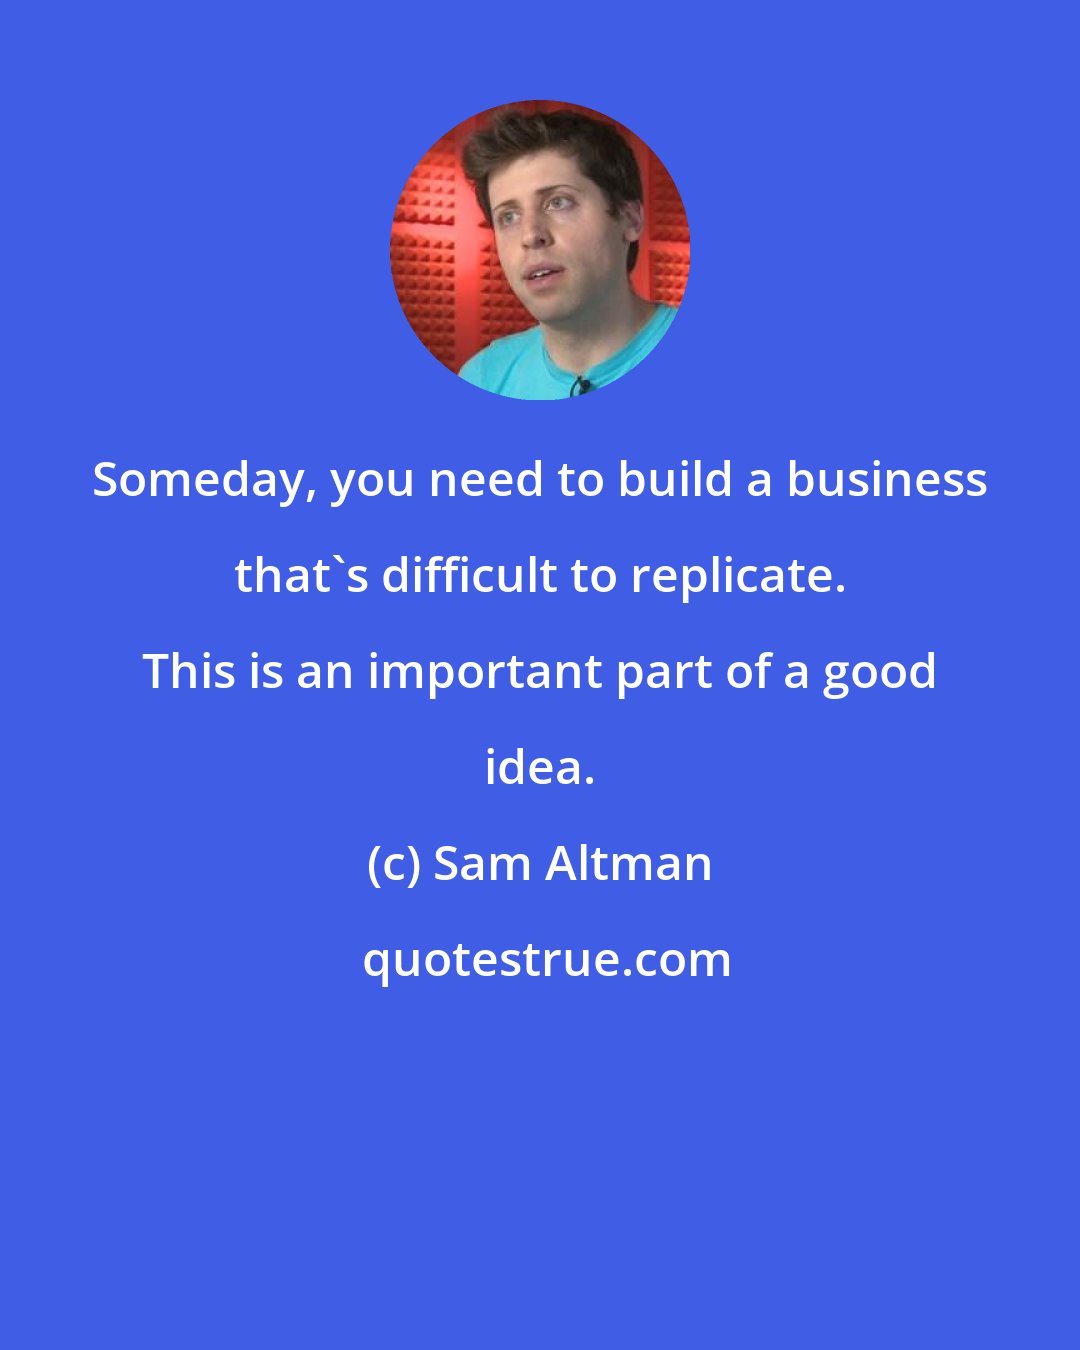 Sam Altman: Someday, you need to build a business that's difficult to replicate. This is an important part of a good idea.